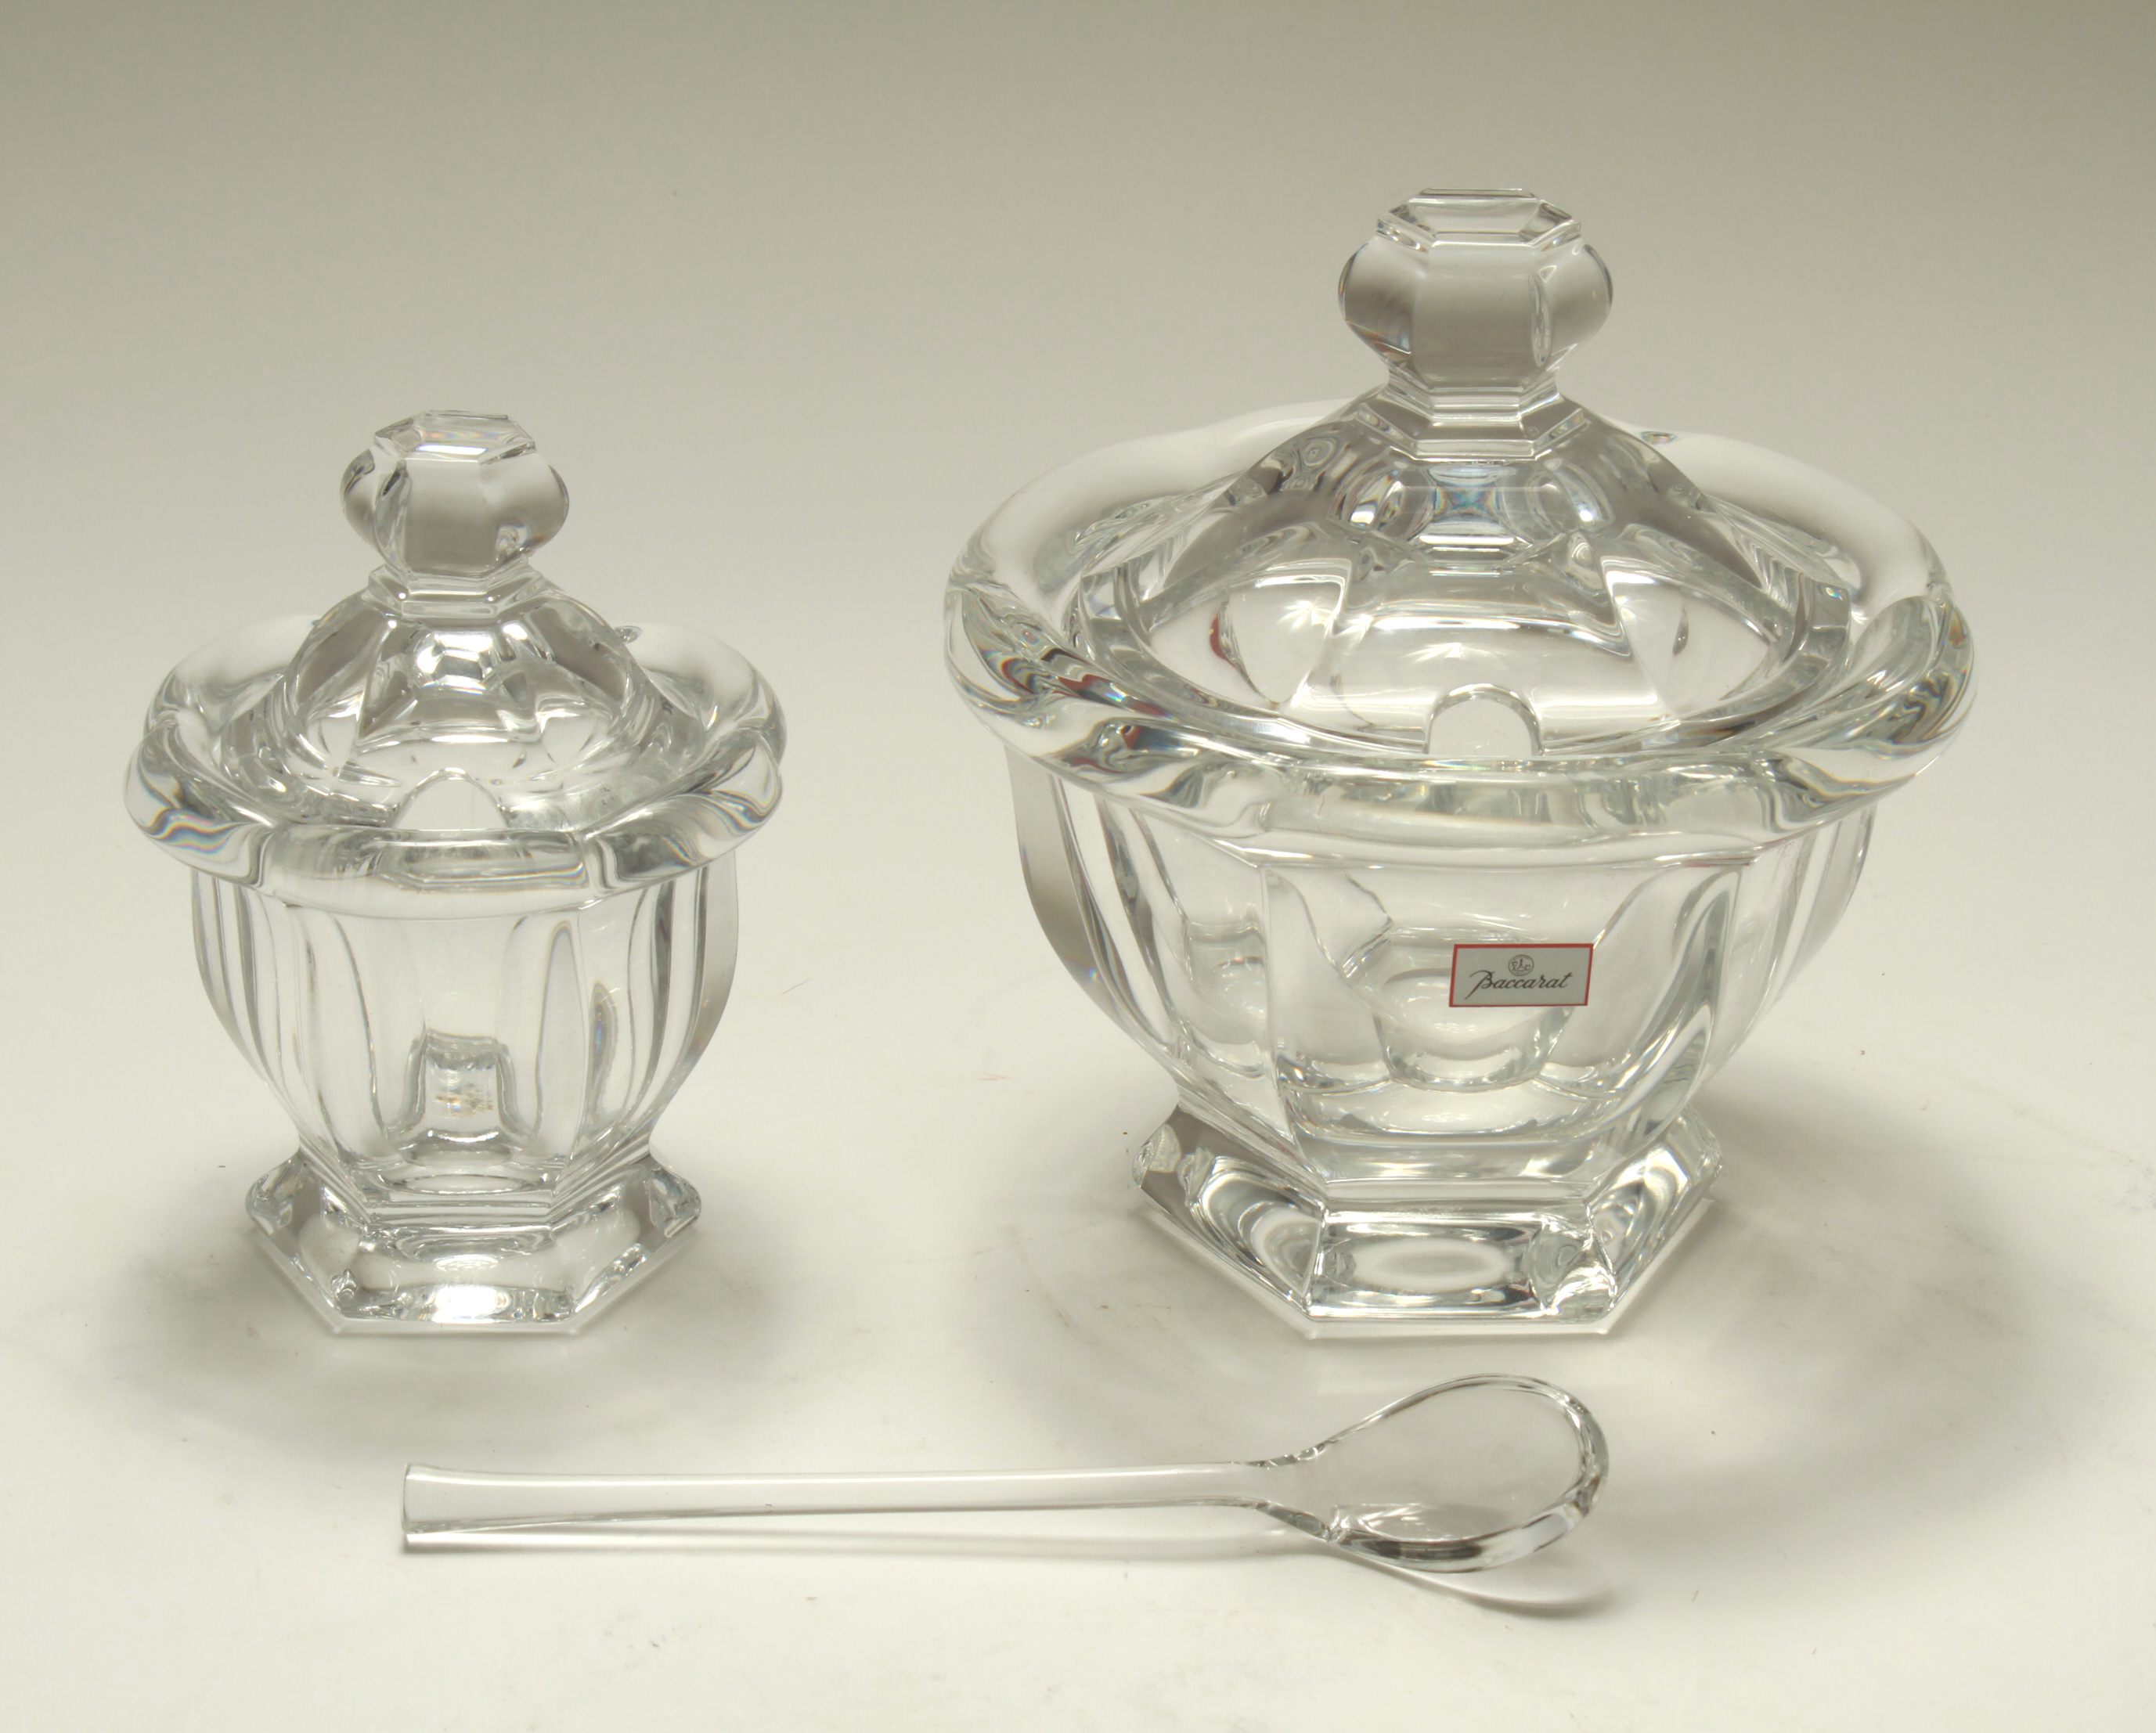 BACCARAT CRYSTAL MUSTARD OR CONDIMENT